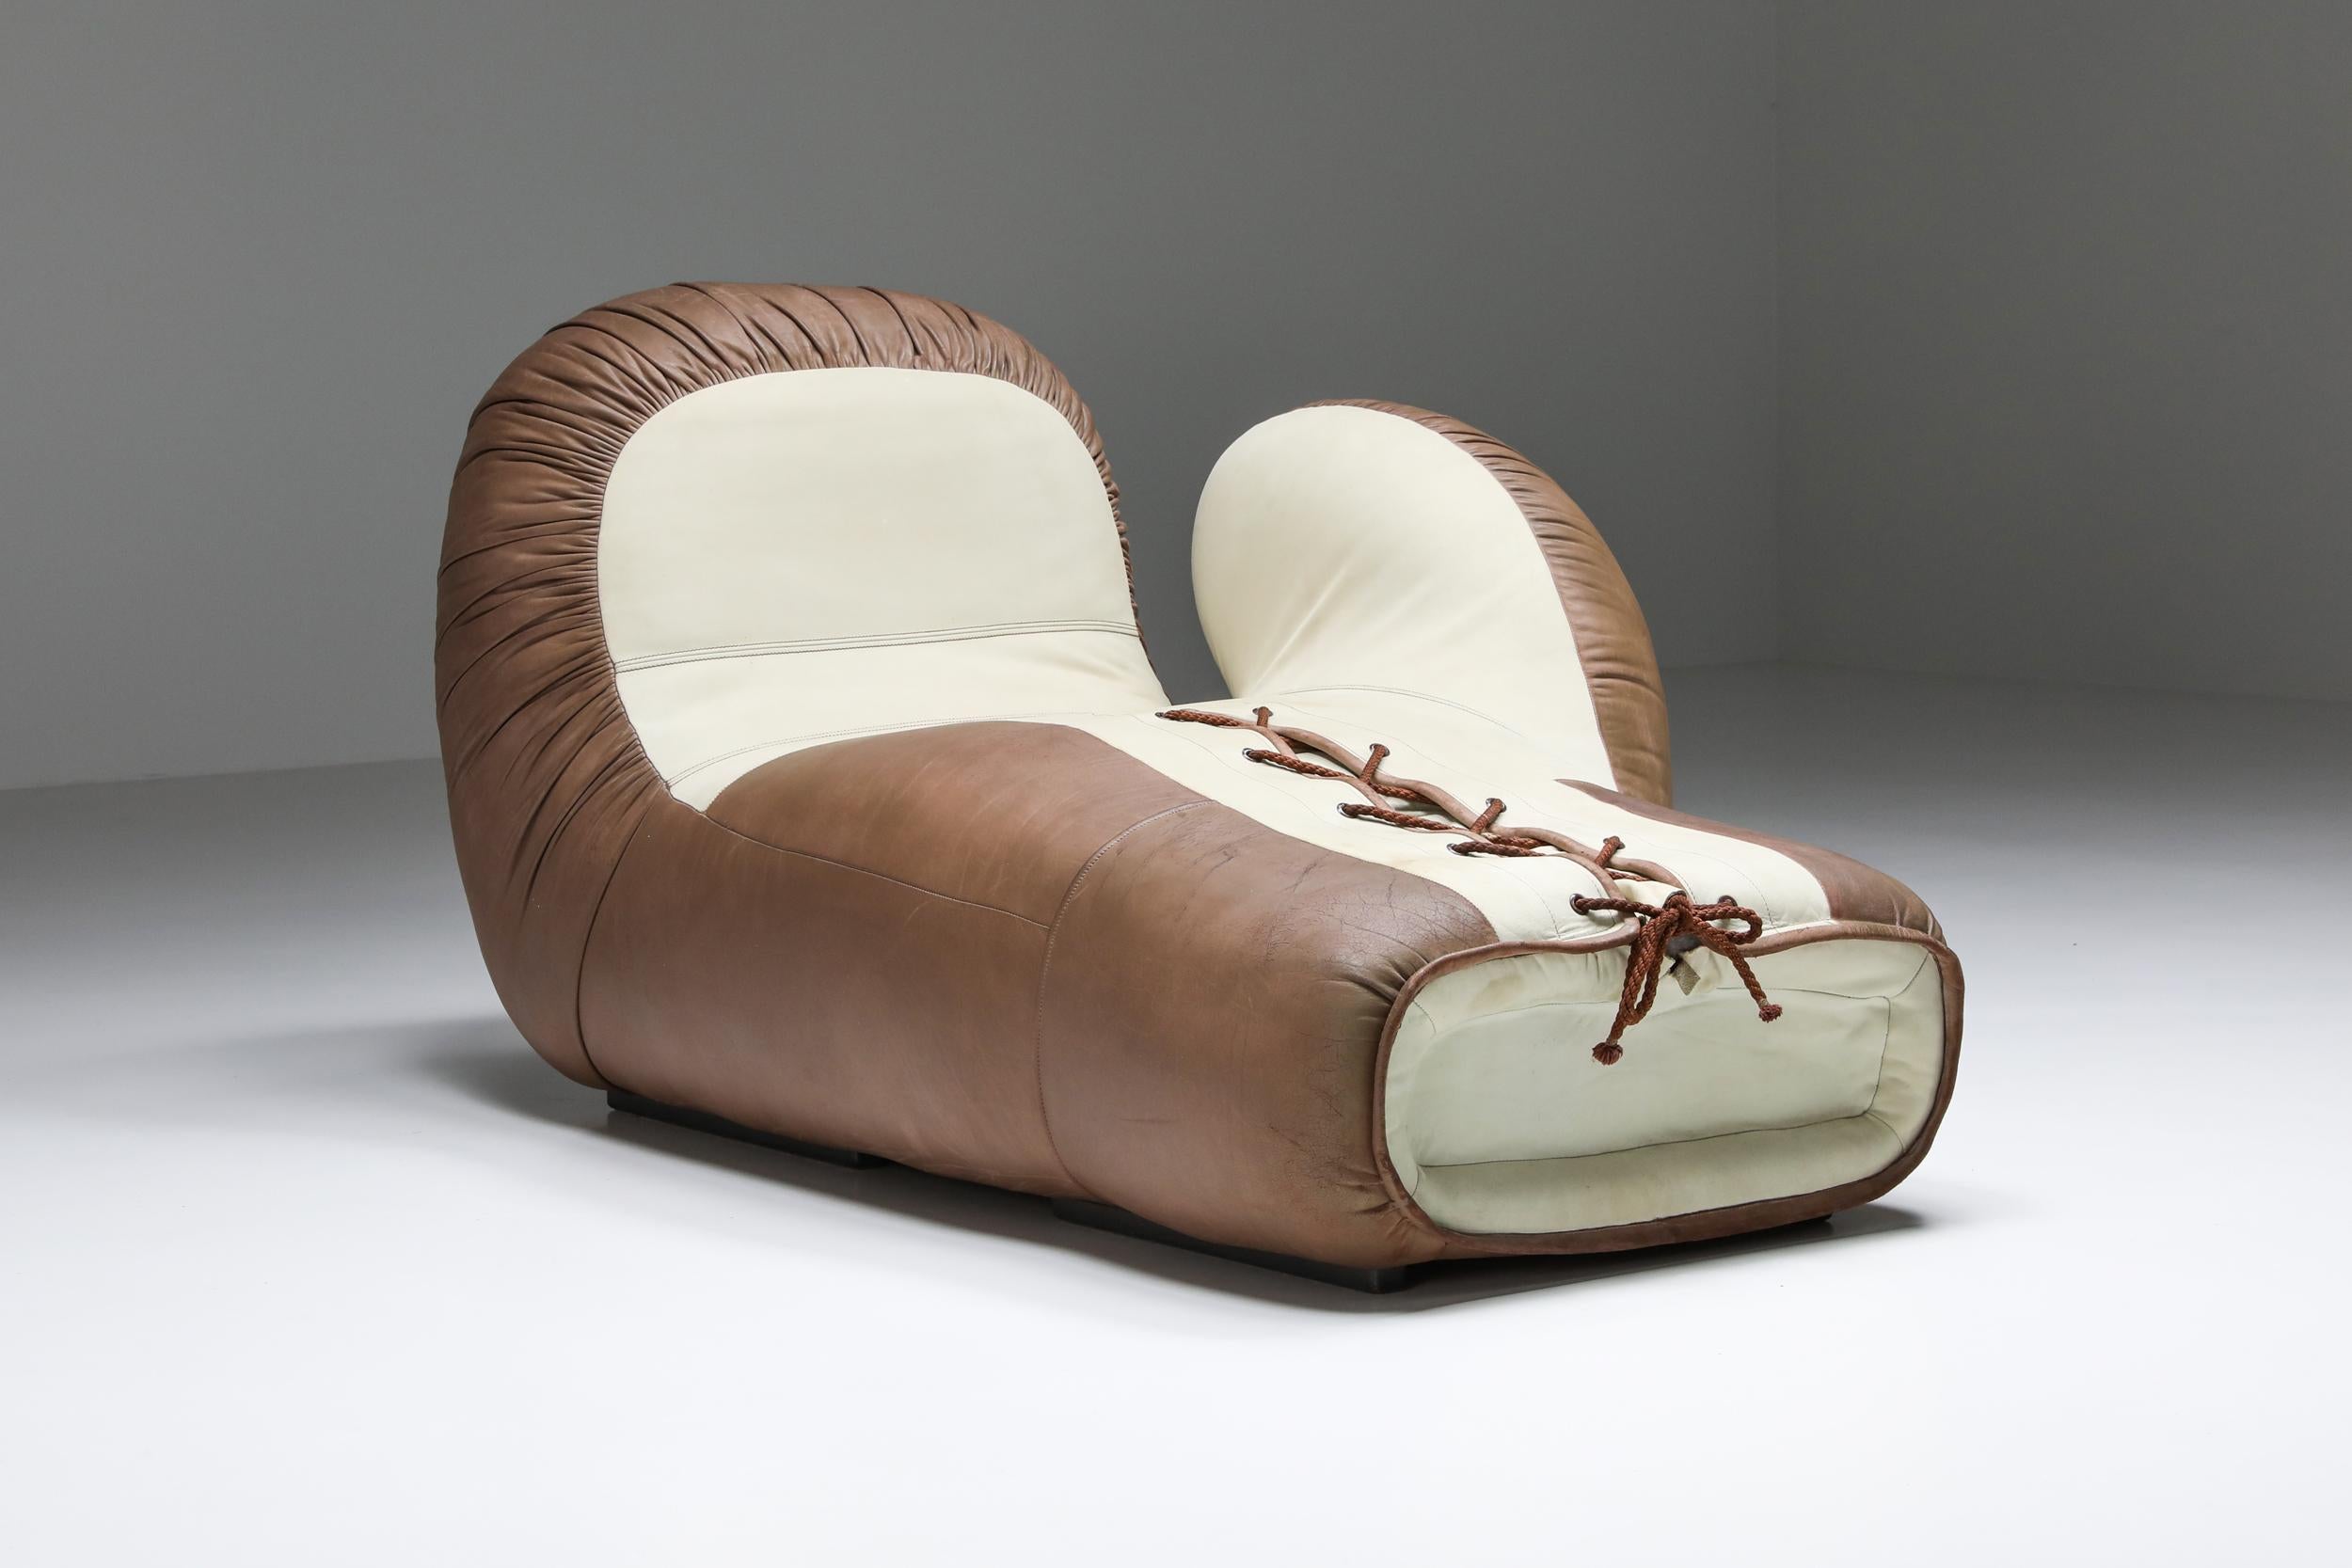 20th Century De Sede Boxing Glove Sectional Sofa, Lounge Chair DS-2878, Swiss Design, 1978